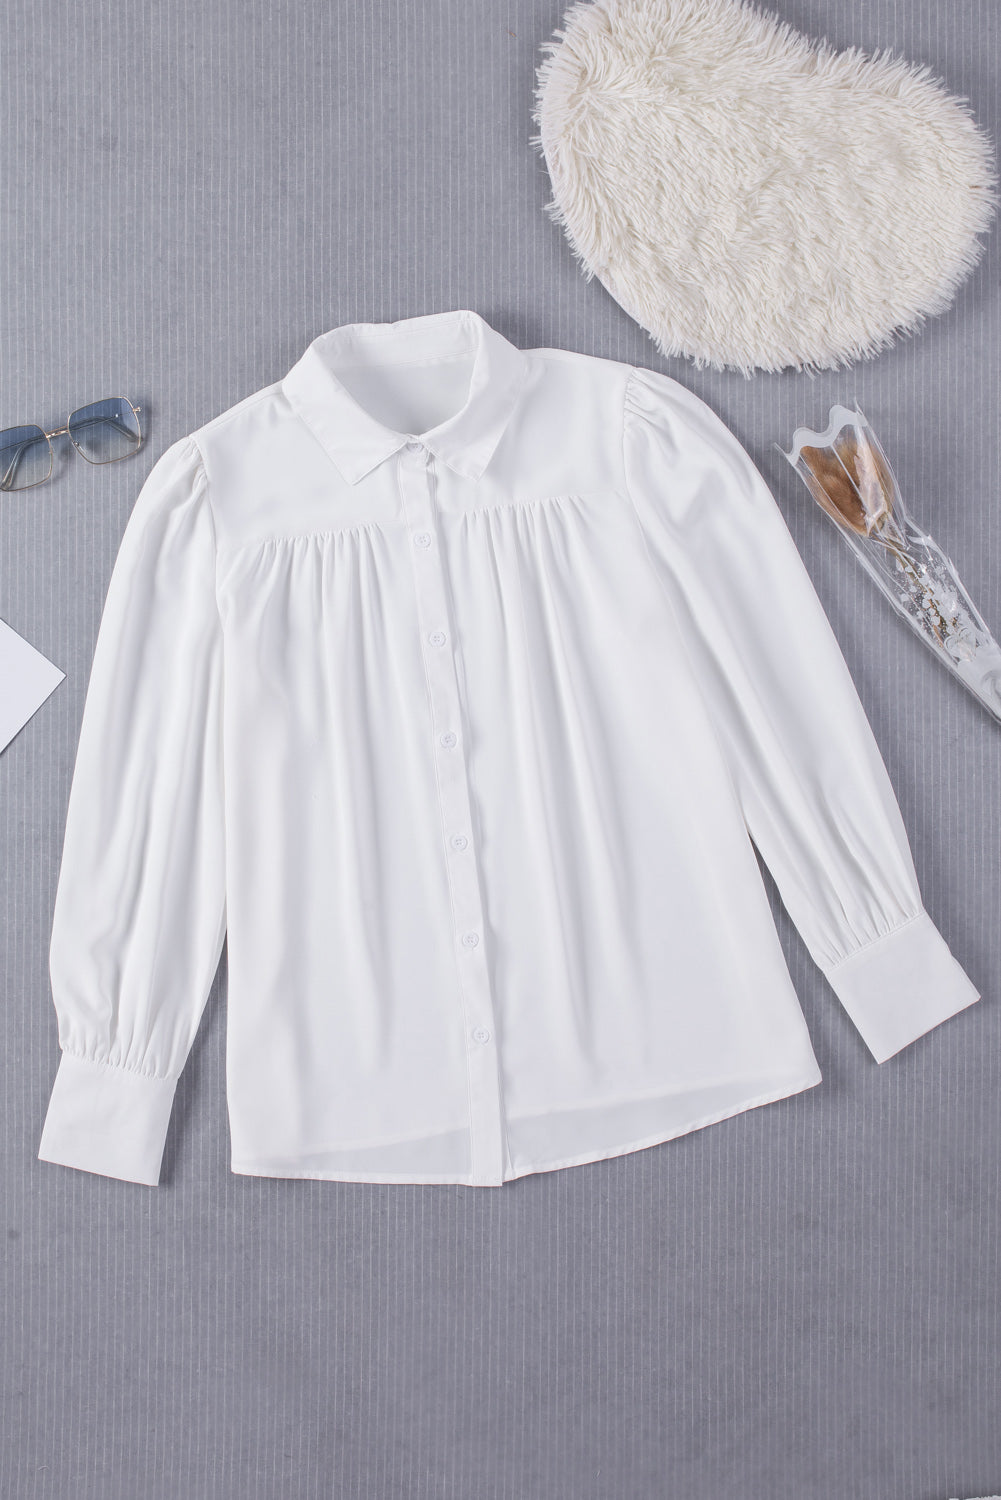 Puff Sleeve Blouse, See Colors! Women's Office Apparel, White/Black Tops, Shirts